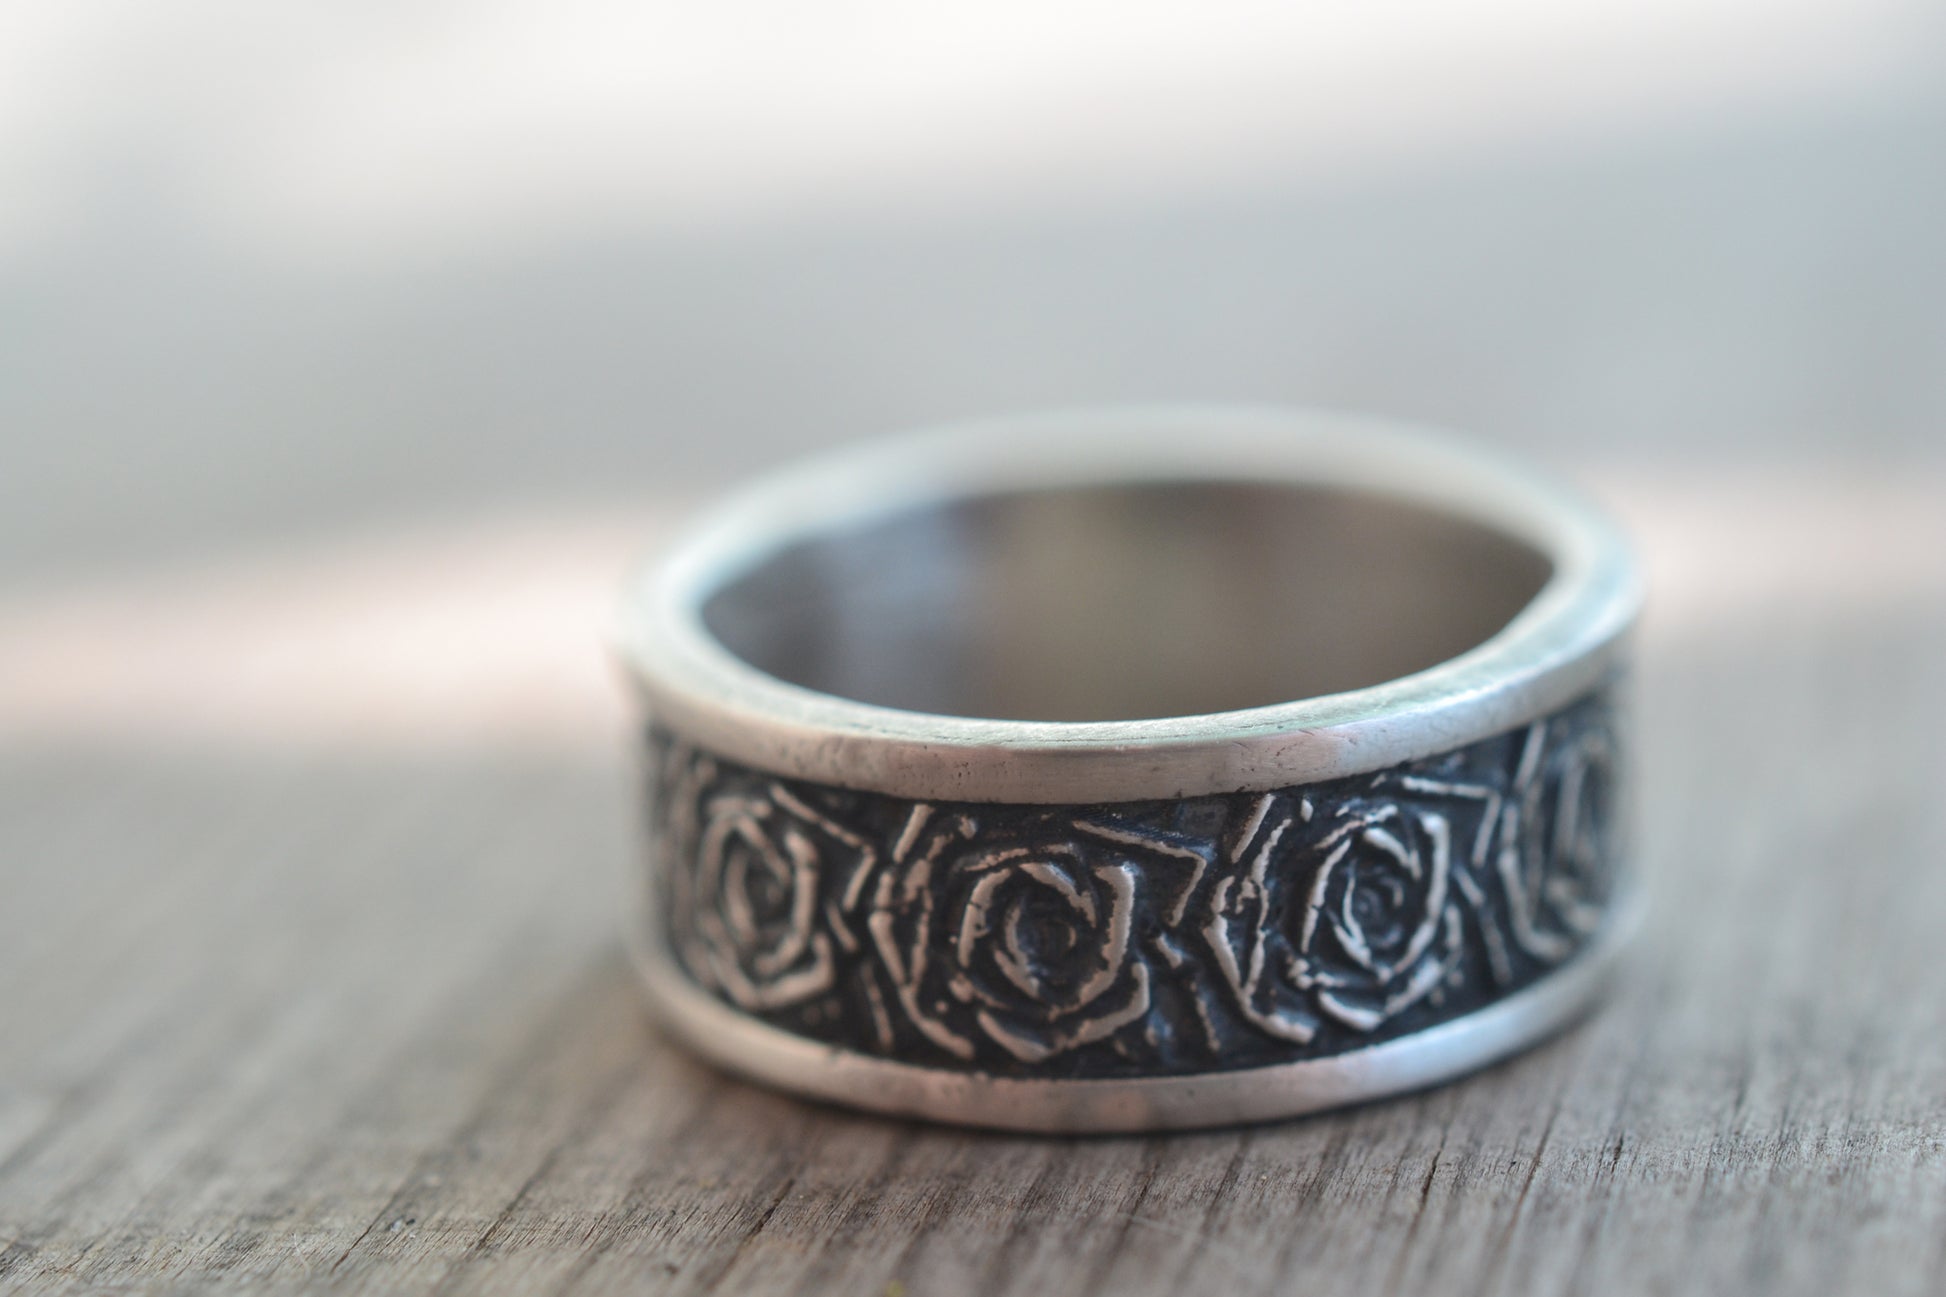 8mm Wide Rose Pattern Wedding Ring in Silver